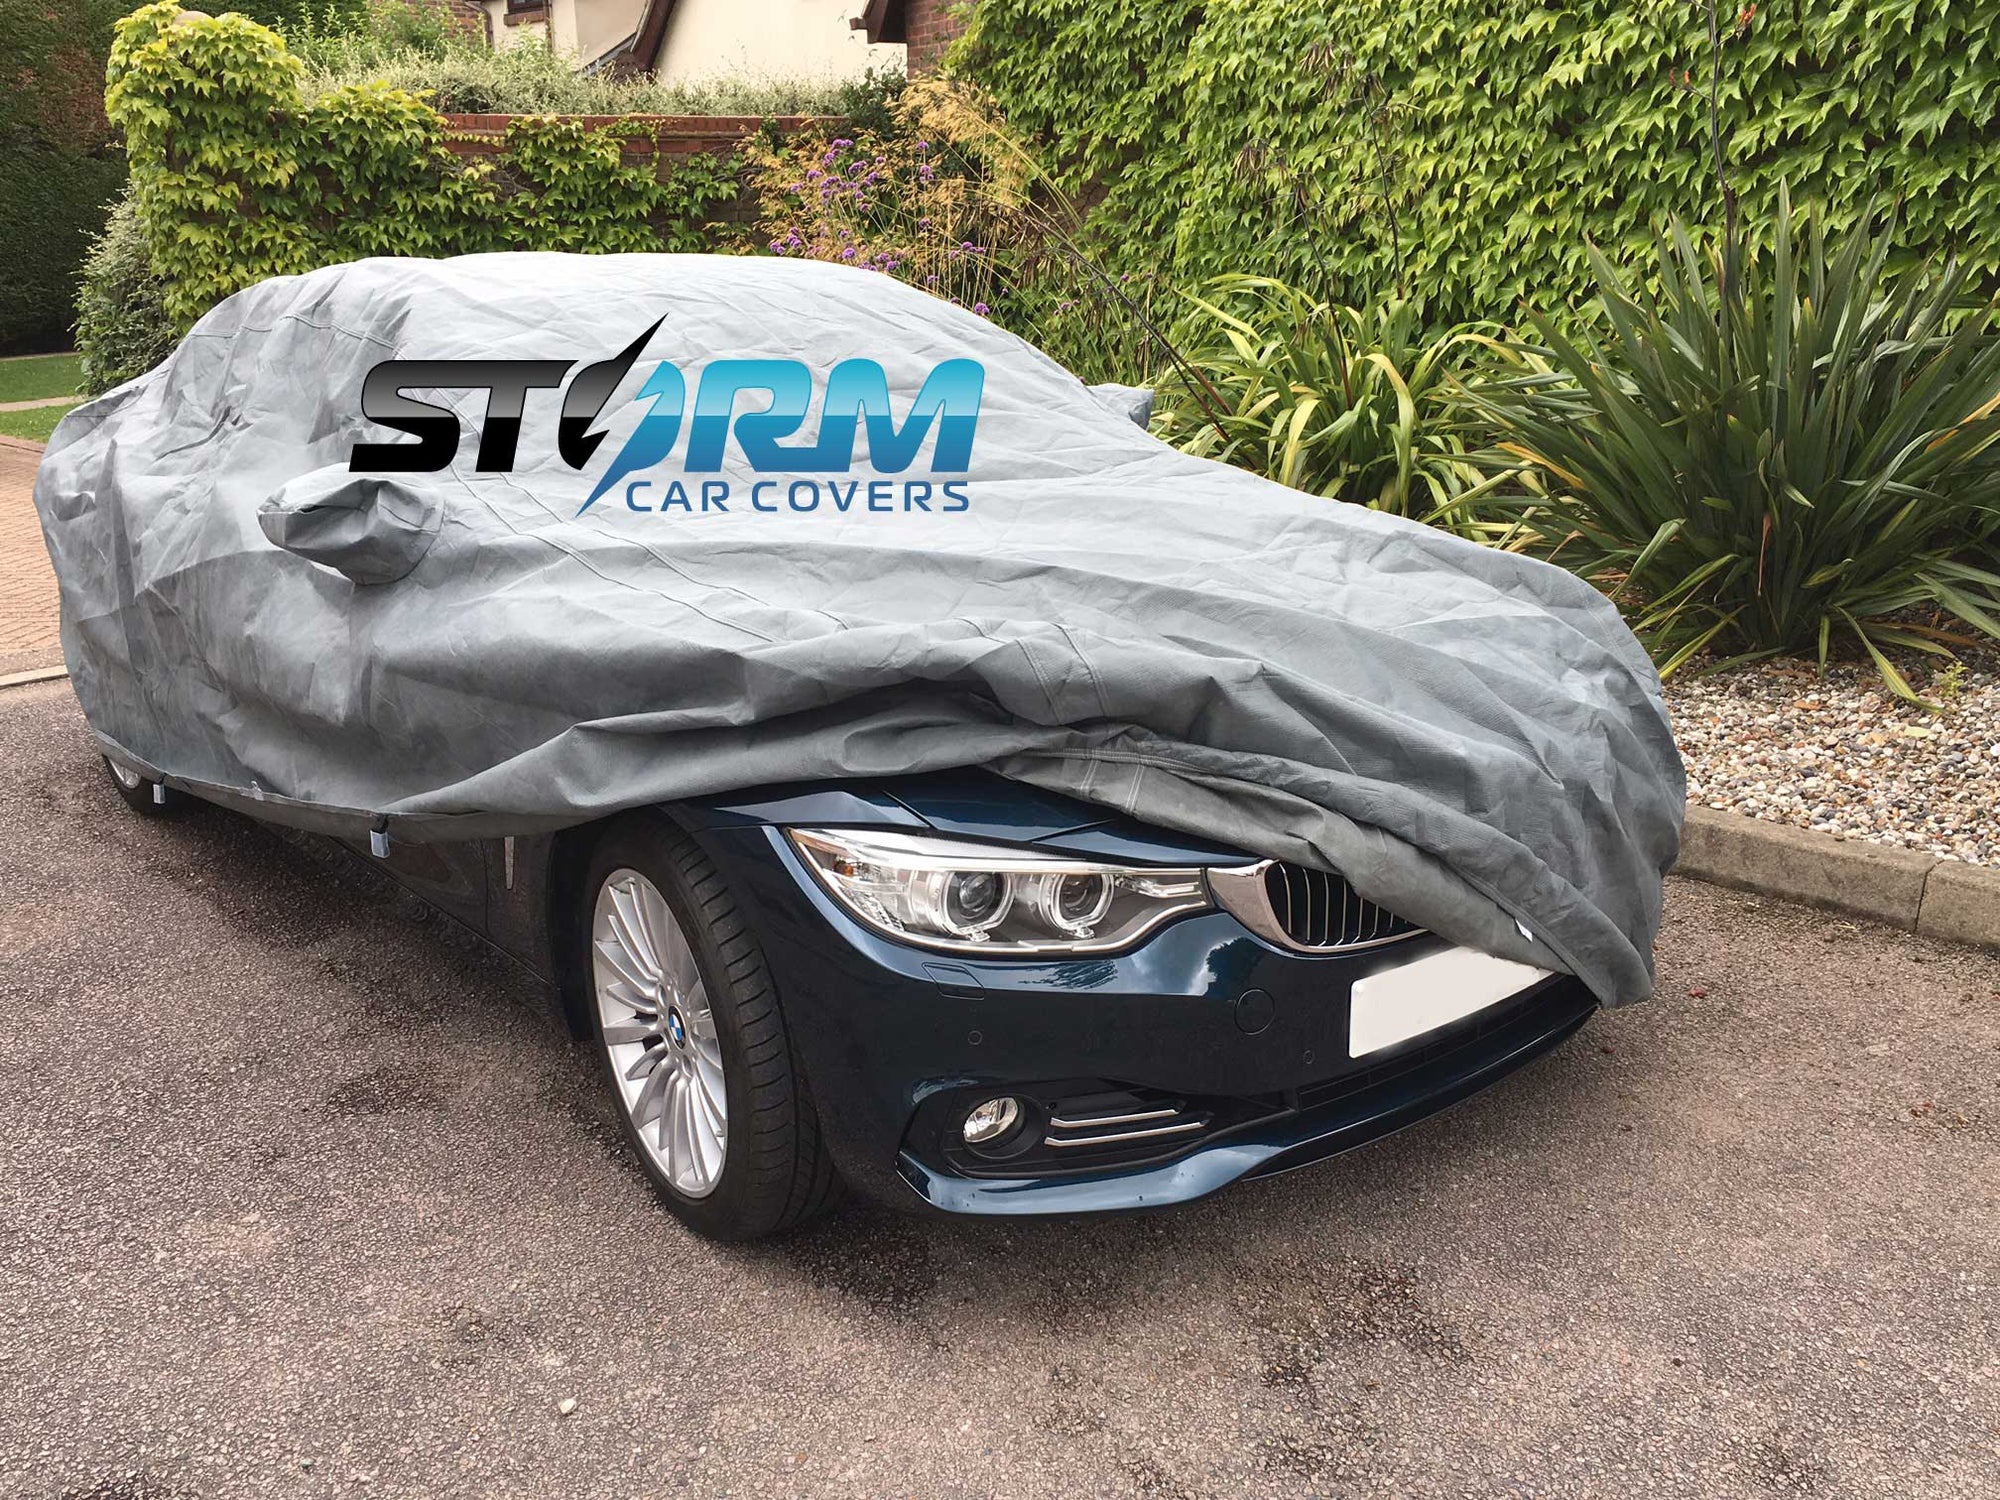 Fclues STORE Car Cover For MG ZS EV Color Blue